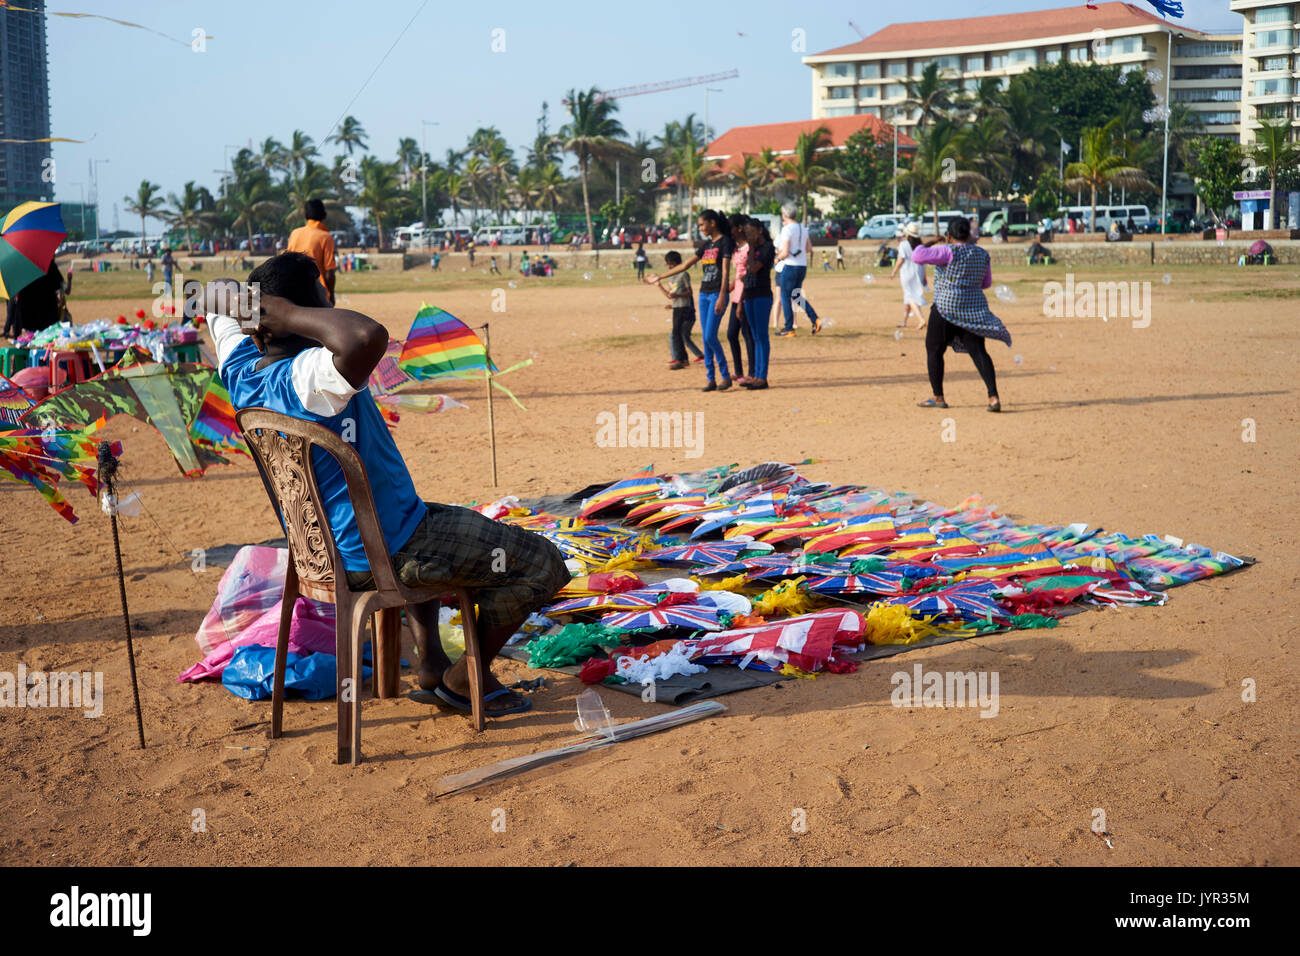 Street traders sell their goods on a sand surface in Sri Lanka Stock Photo